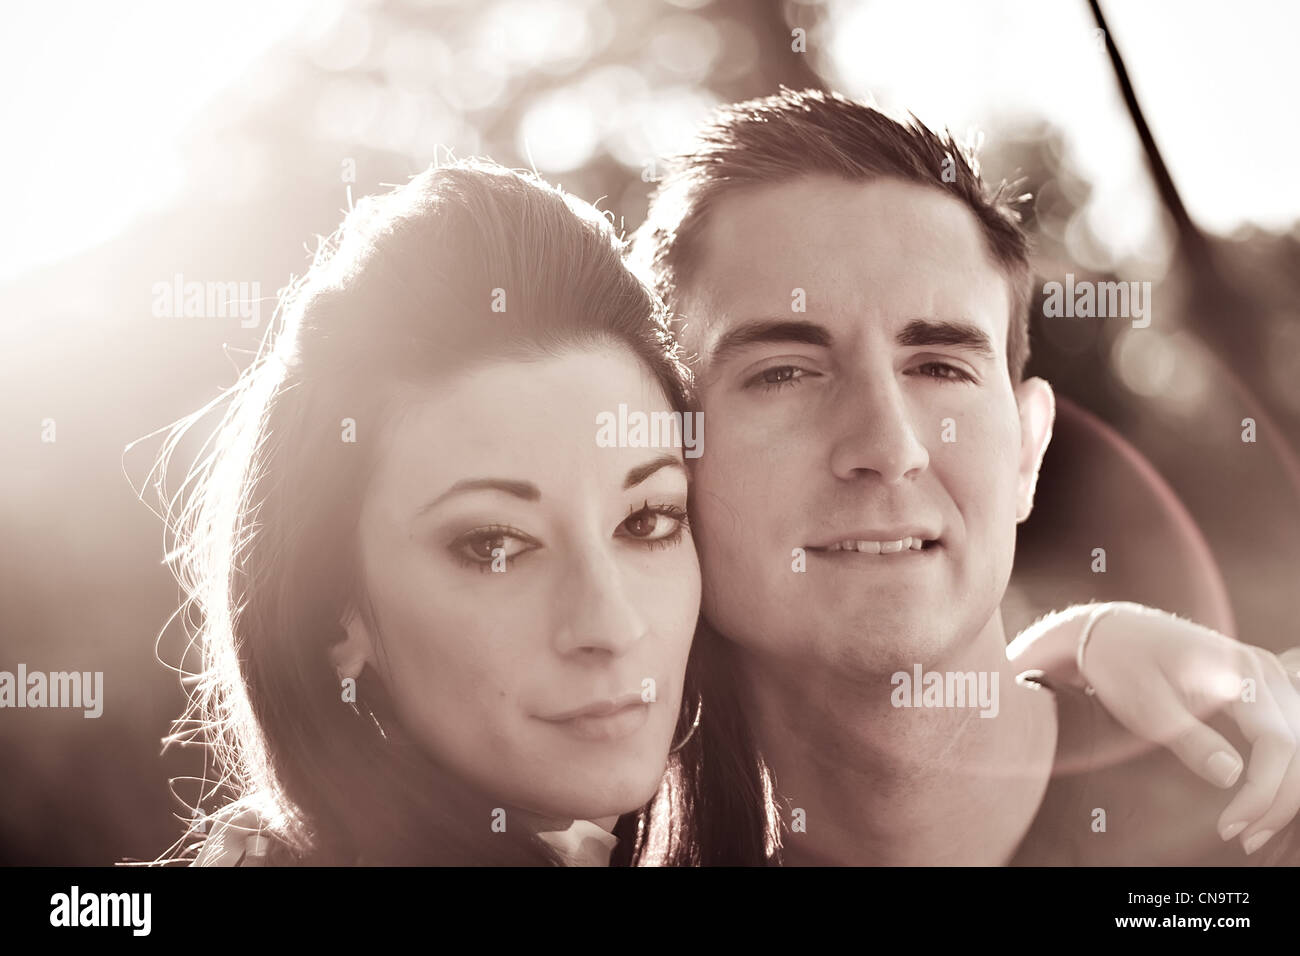 A good looking young couple posing together. Backlit lighting with strong lens flare and sepia tone. Stock Photo